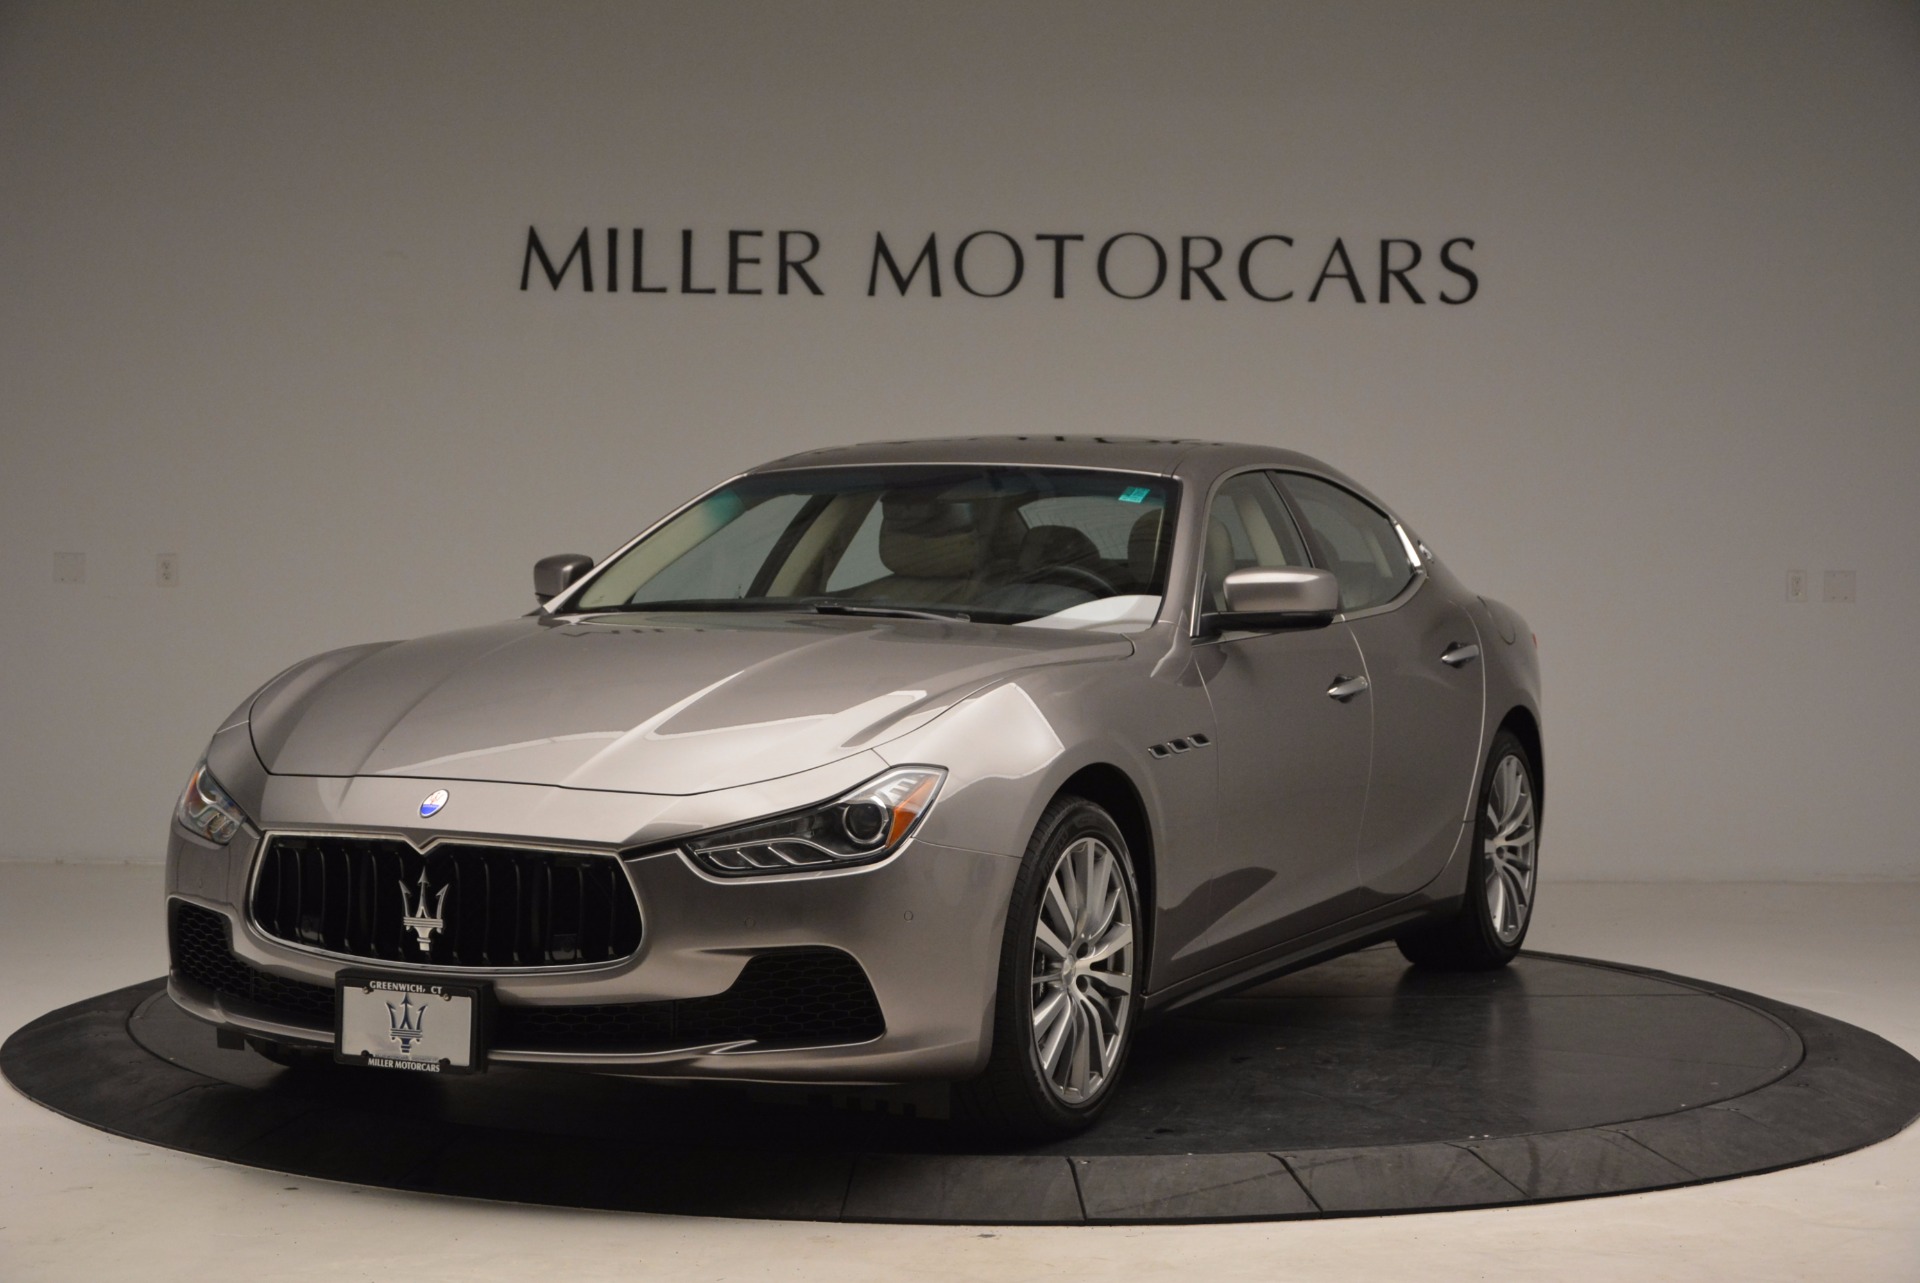 Used 2015 Maserati Ghibli S Q4 for sale Sold at Bentley Greenwich in Greenwich CT 06830 1